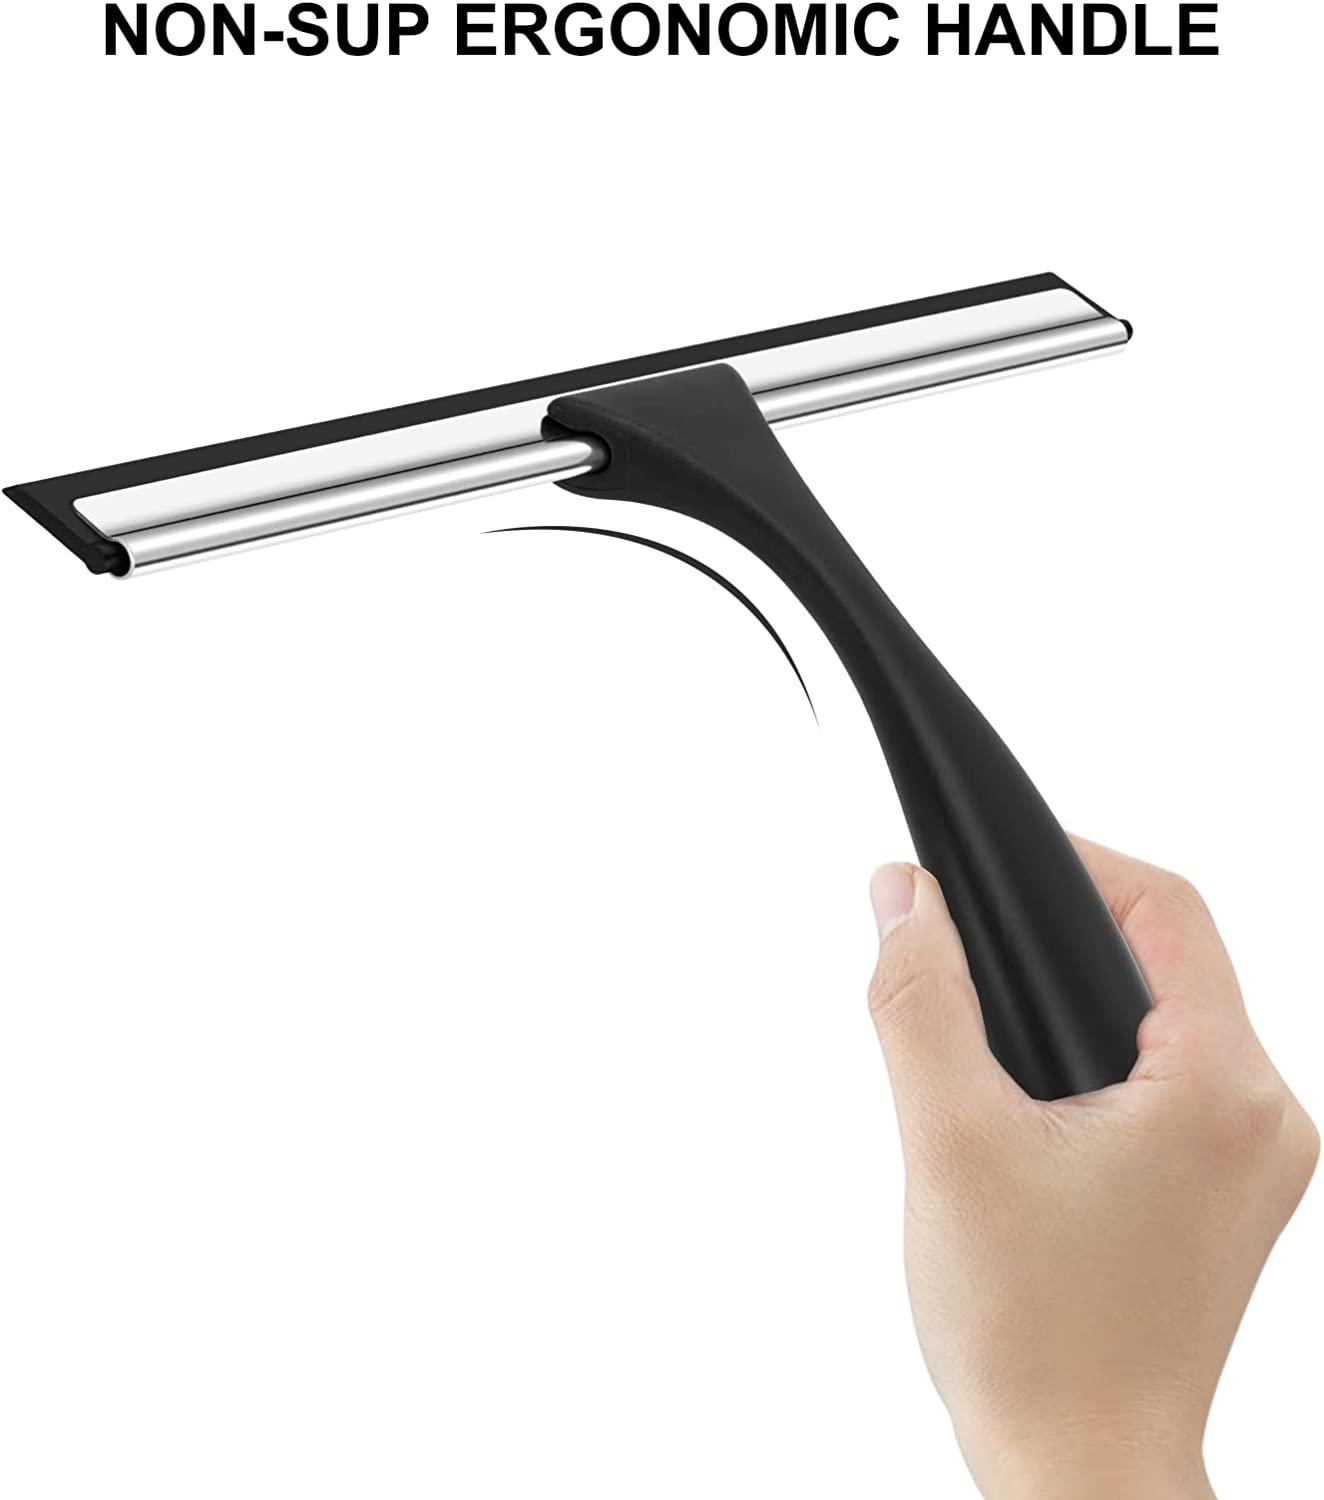 SetSail Shower Squeegee for Glass Door Stainless Steel Window Squeegee  All-Purpose Heavy-Duty Bathroom Squeegee for Shower Glass Door and Tile  Cleaning Non-Slip Handle 10 Inches Black